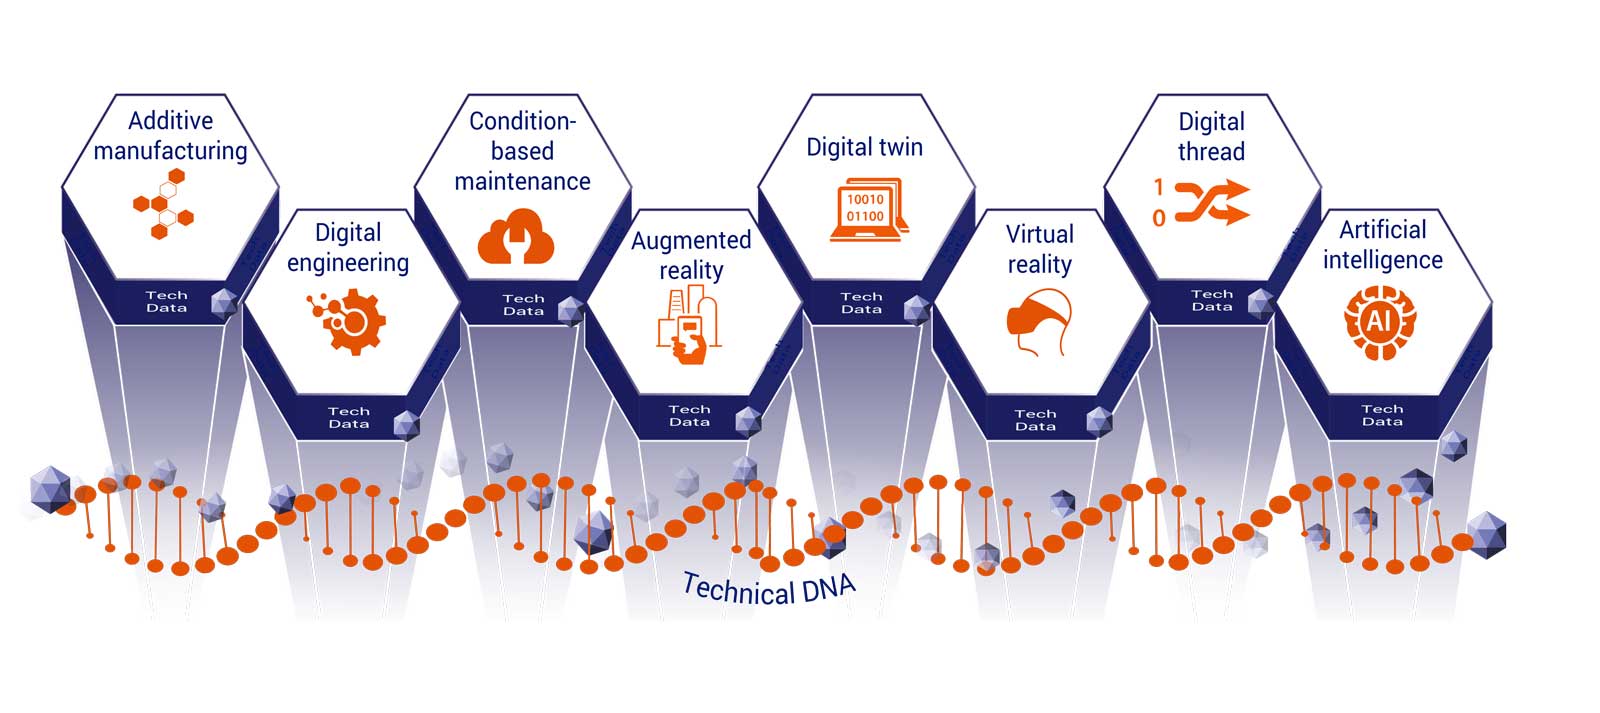 Technical DNA is made from the following tech data: additive manufacturing, digital engineering, condition-based maintenance, augmented reality, digital twin, virtual reality, digital thread, and artificial intelligence.